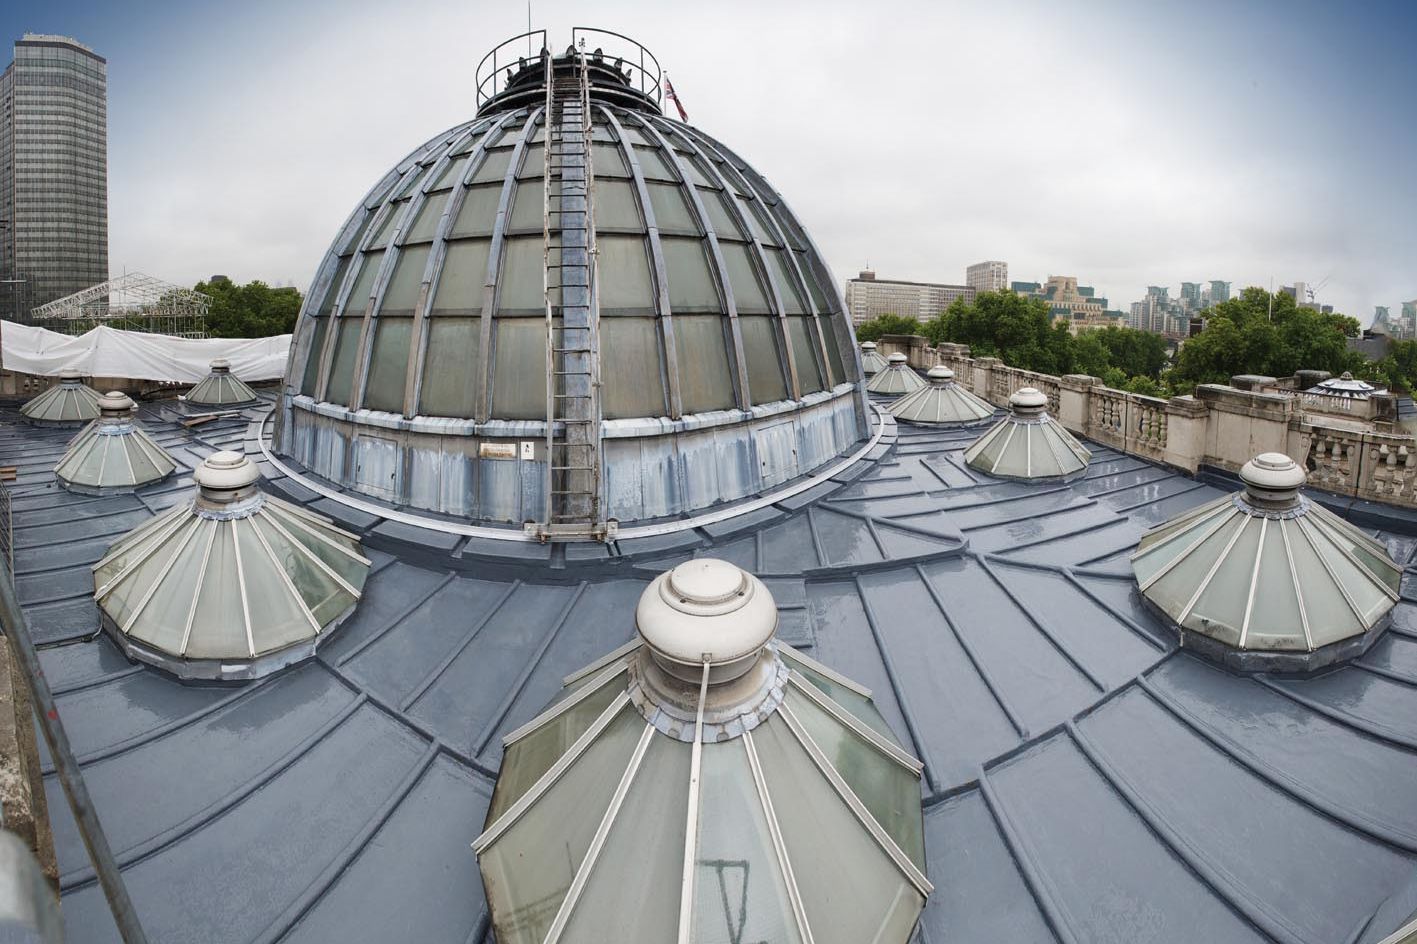 Refurbished roof of the Tate Britain Museum in London